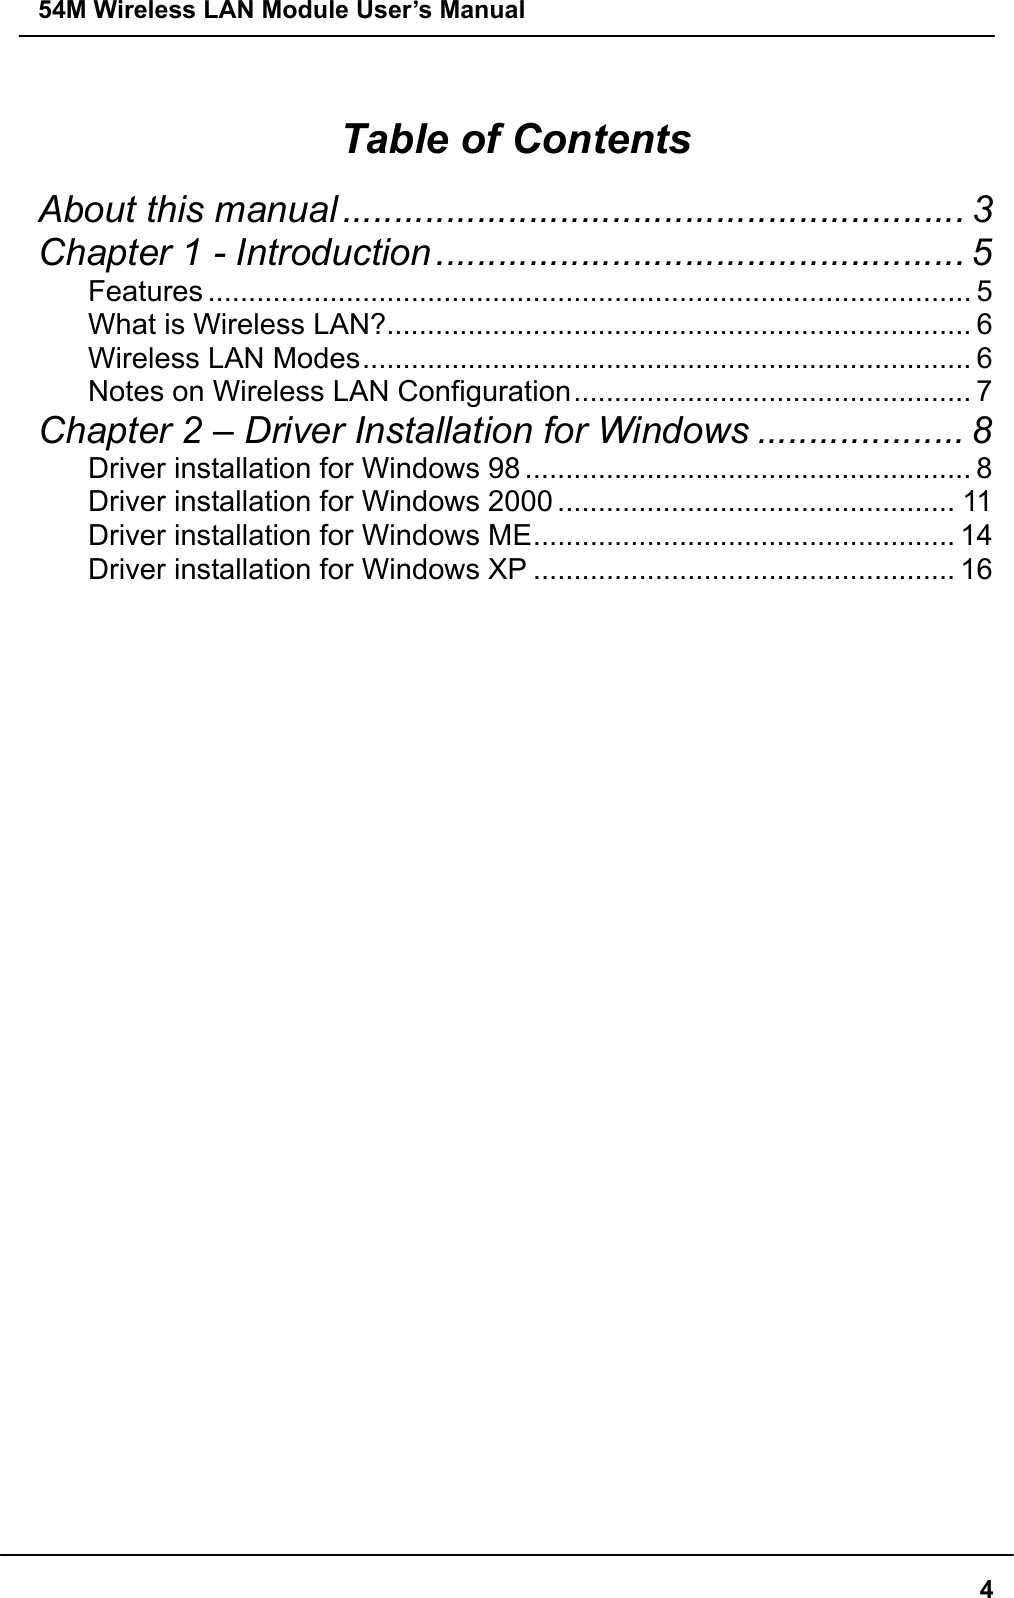 54M Wireless LAN Module User’s Manual  4 Table of Contents About this manual ............................................................ 3 Chapter 1 - Introduction................................................... 5 Features .............................................................................................. 5 What is Wireless LAN?........................................................................ 6 Wireless LAN Modes........................................................................... 6 Notes on Wireless LAN Configuration................................................. 7 Chapter 2 – Driver Installation for Windows .................... 8 Driver installation for Windows 98 ....................................................... 8 Driver installation for Windows 2000 ................................................. 11 Driver installation for Windows ME.................................................... 14 Driver installation for Windows XP .................................................... 16  